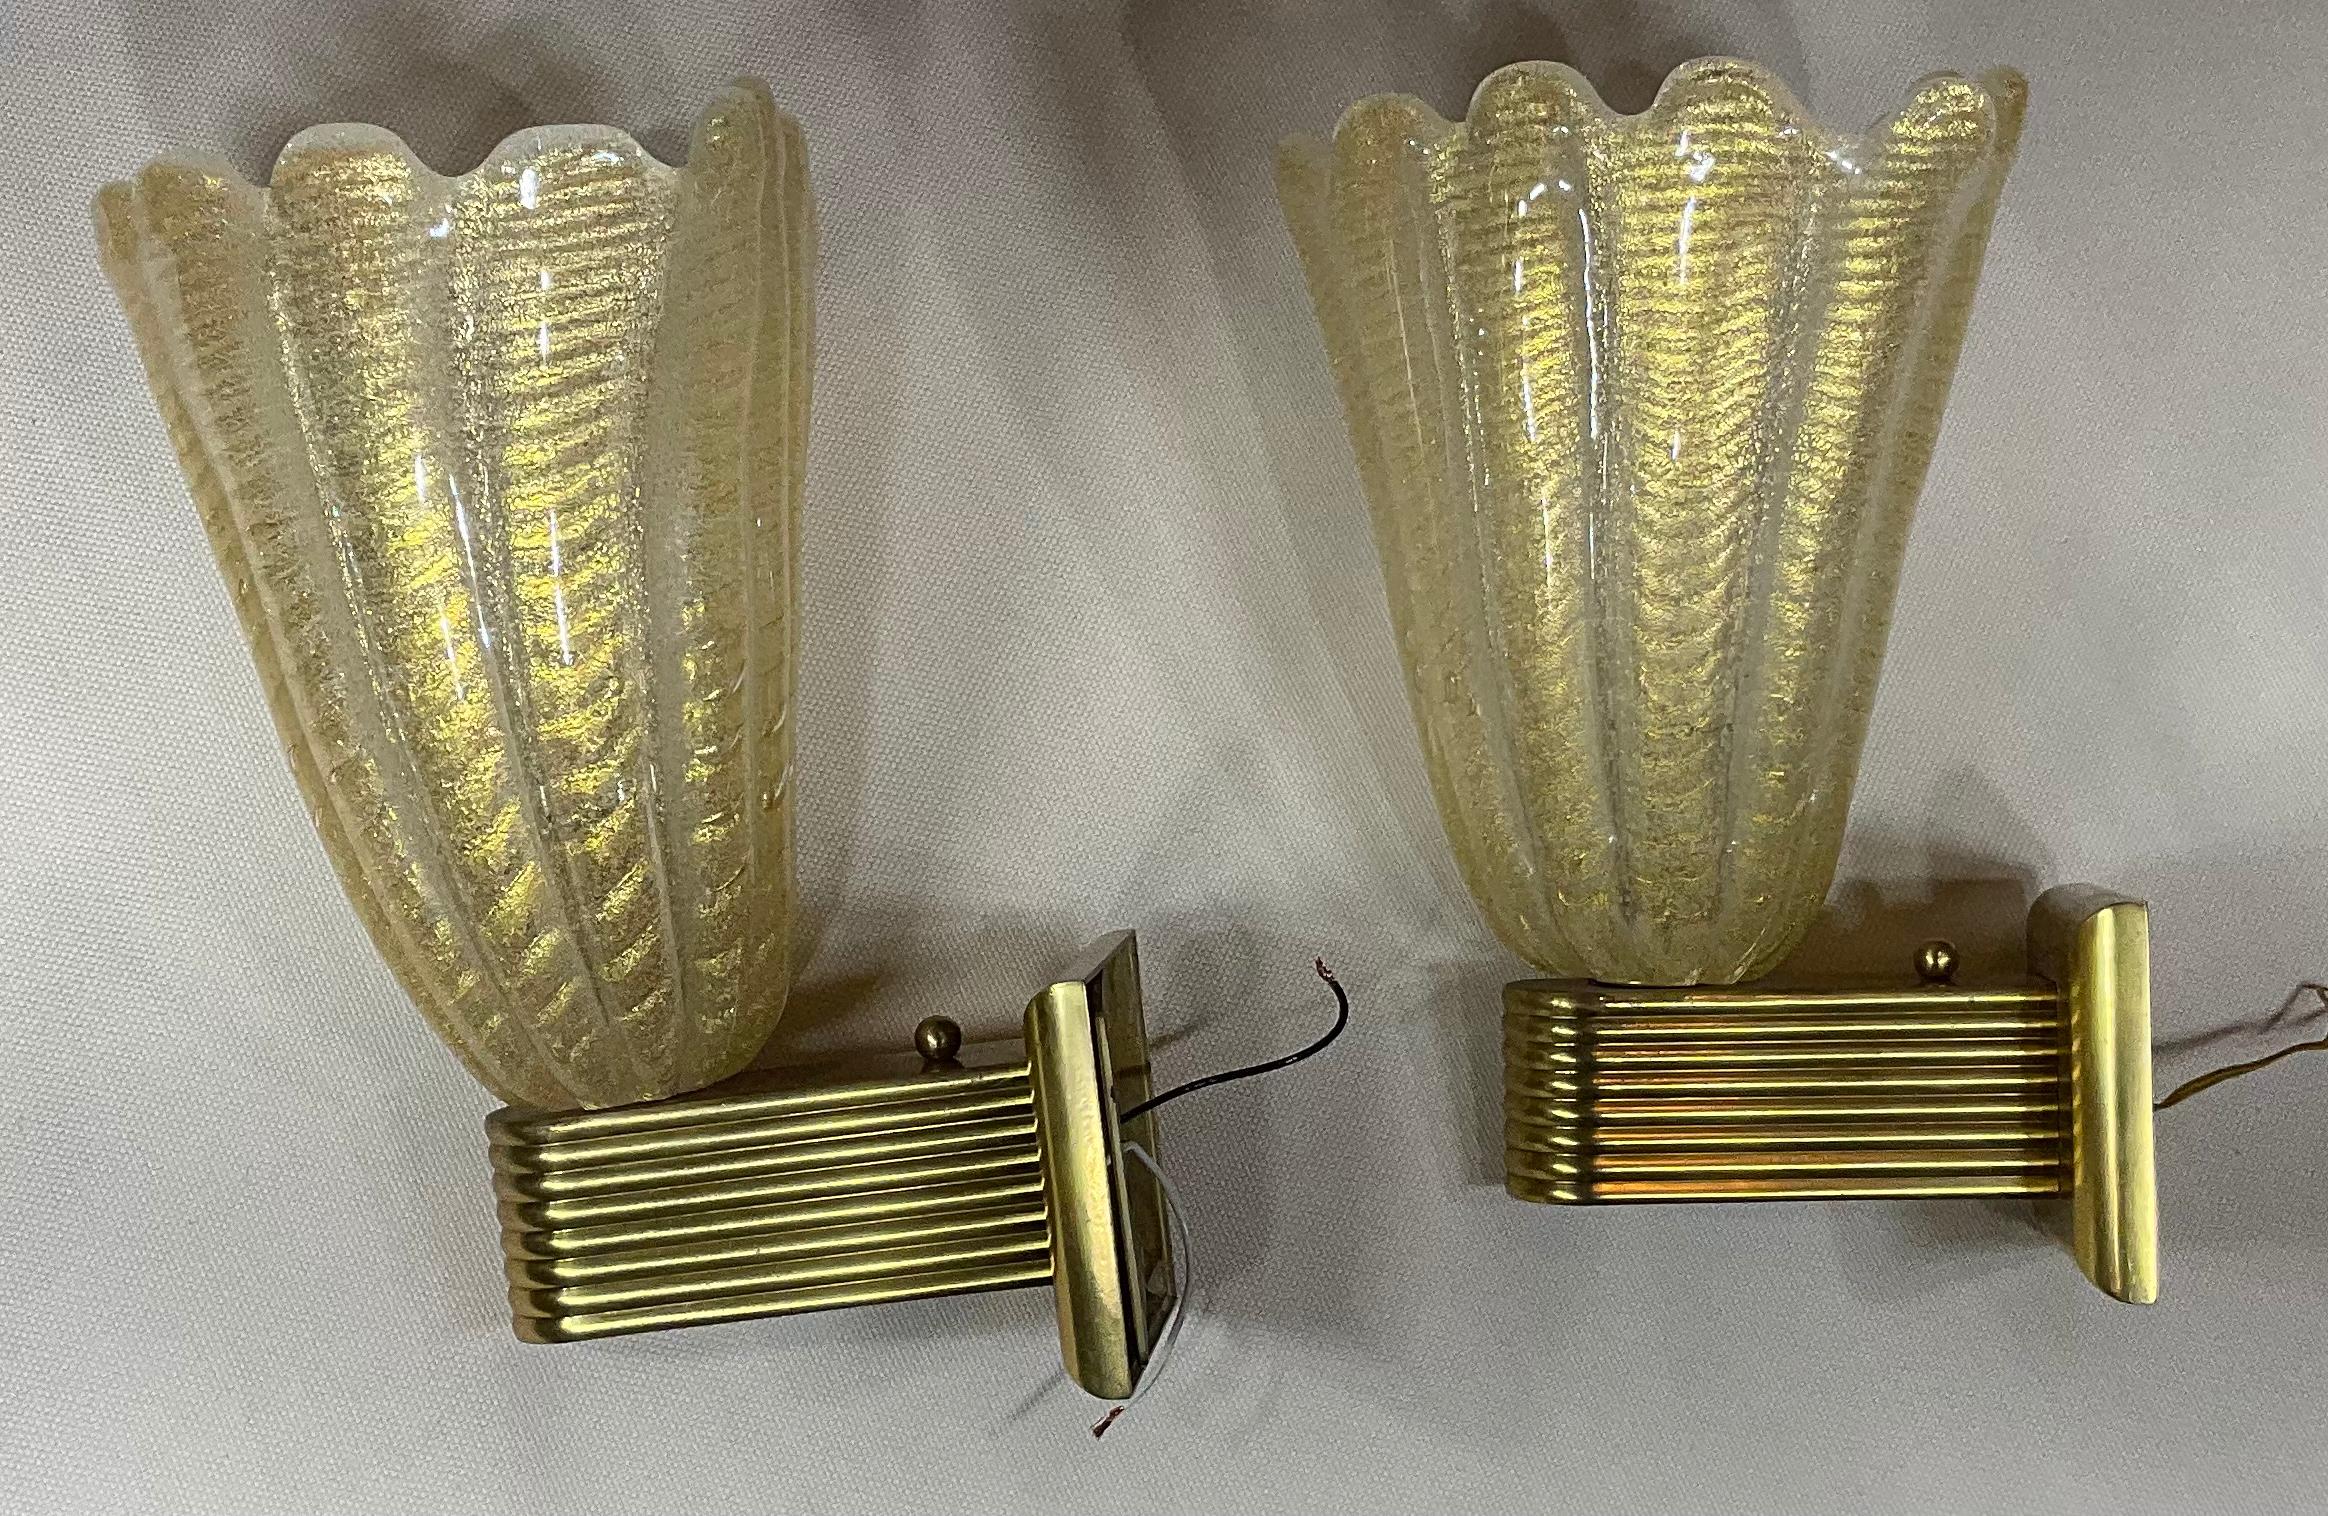 Elegant pair of hand blown glass sconces made probably by Barovier and Toso. From Italy . The murano glass sconces are mounted on nice brass backplate
Glass size is slightly different.
Exceptional object of art for wall display.
Sizes:
1. 9”